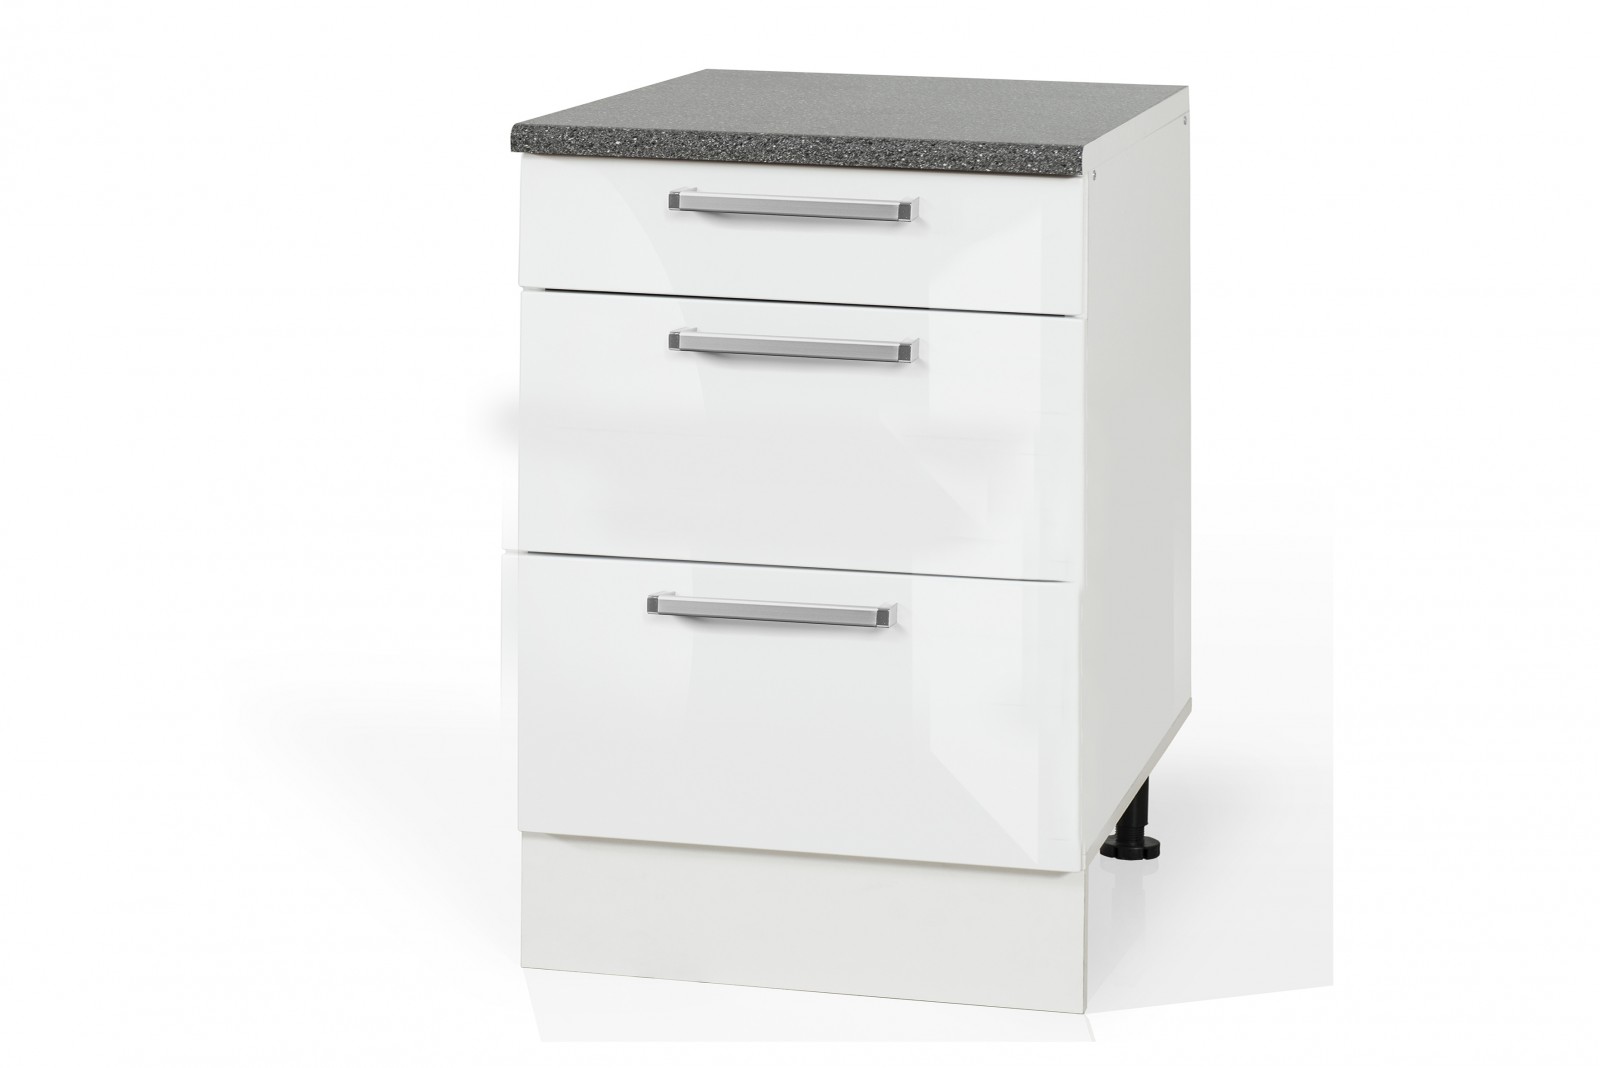 High Gloss White Base drawer cabinet S60SZ3 for kitchen